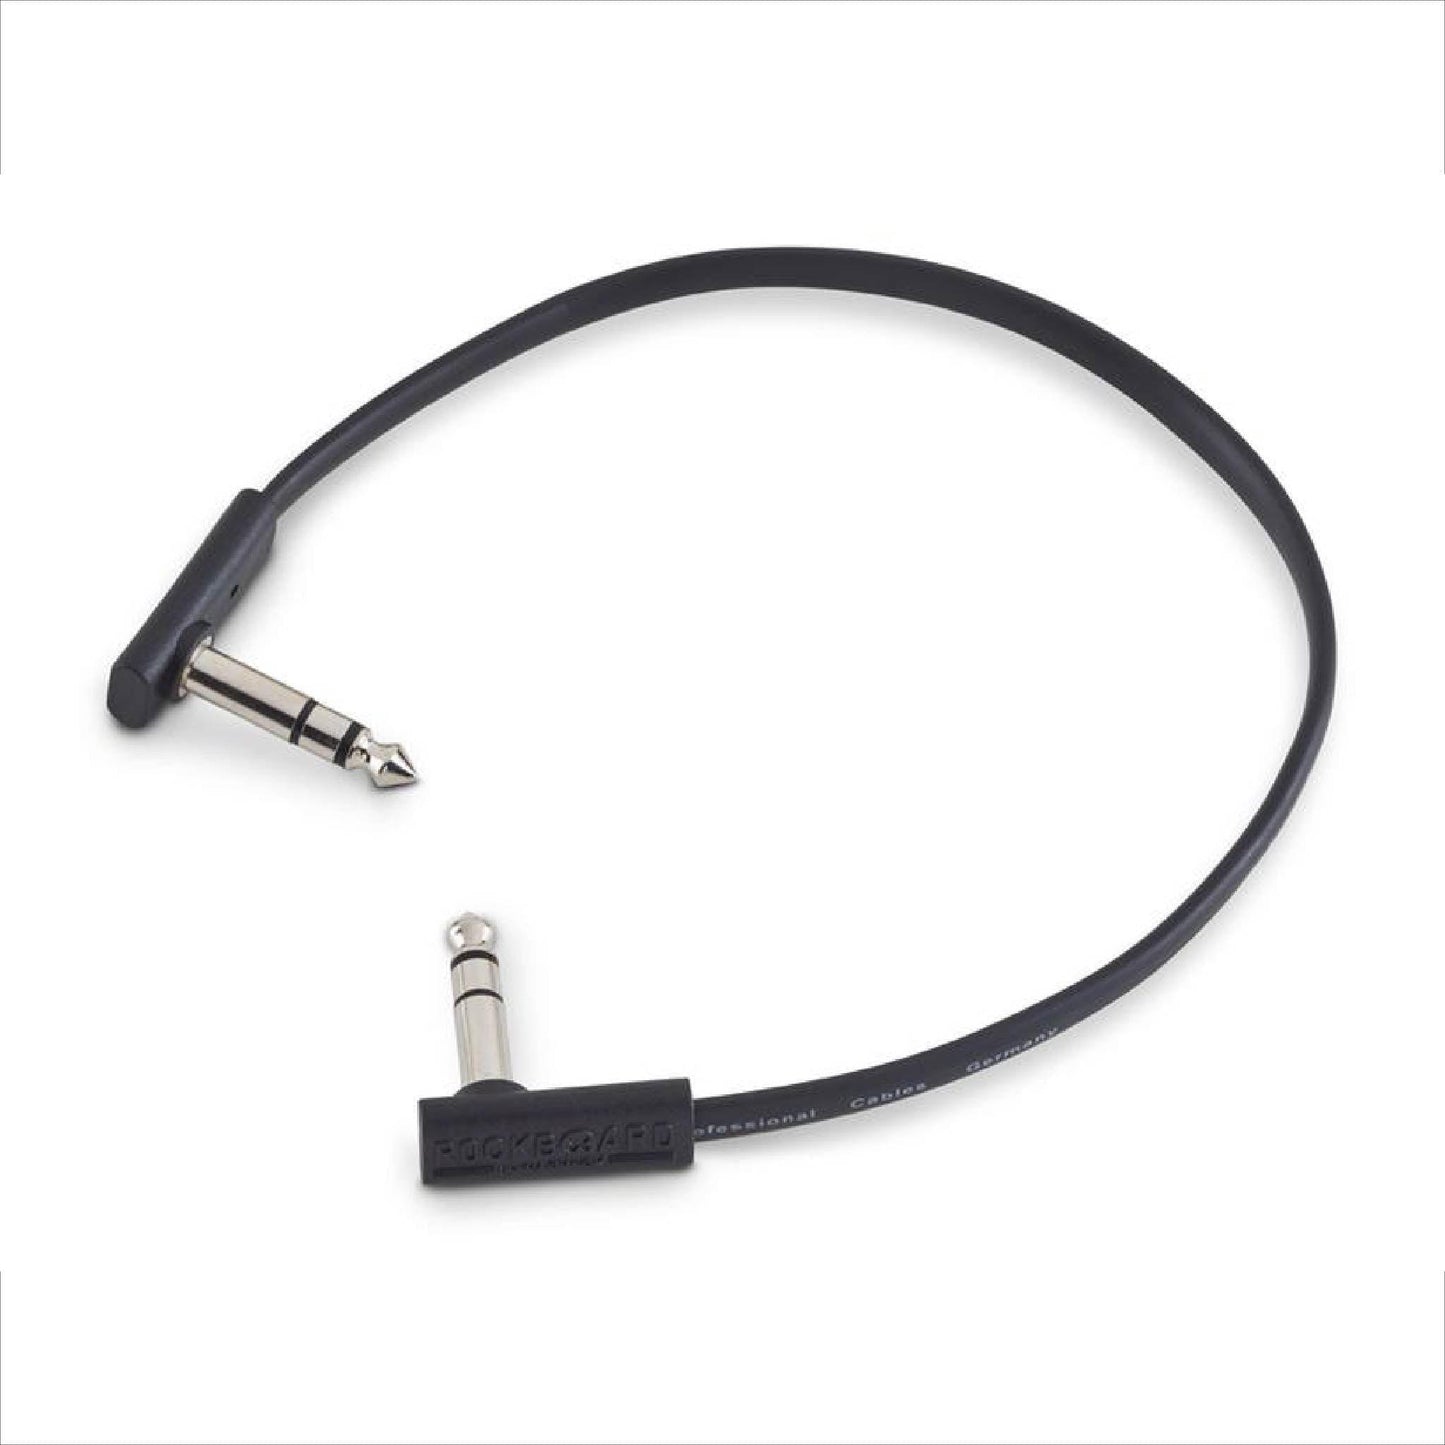 30cm Rockboard Flat TRS Stereo Cable